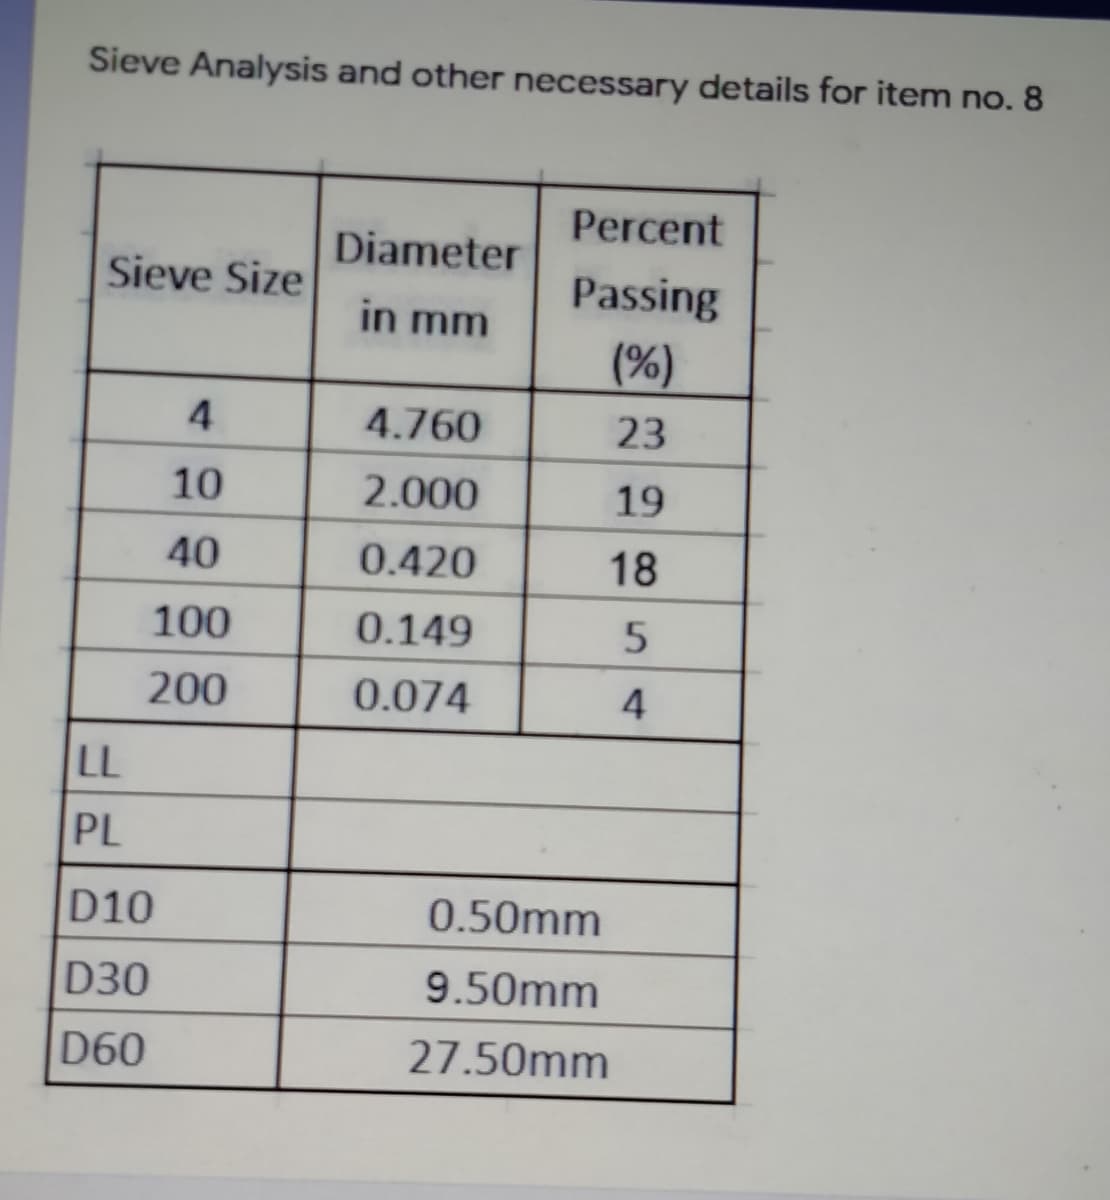 Sieve Analysis and other necessary details for item no. 8
Percent
Diameter
Sieve Size
Passing
in mm
(%)
4
4.760
23
10
2.000
19
40
0.420
18
100
0.149
200
0.074
4
LL
PL
D10
0.50mm
D30
9.50mm
D60
27.50mm
